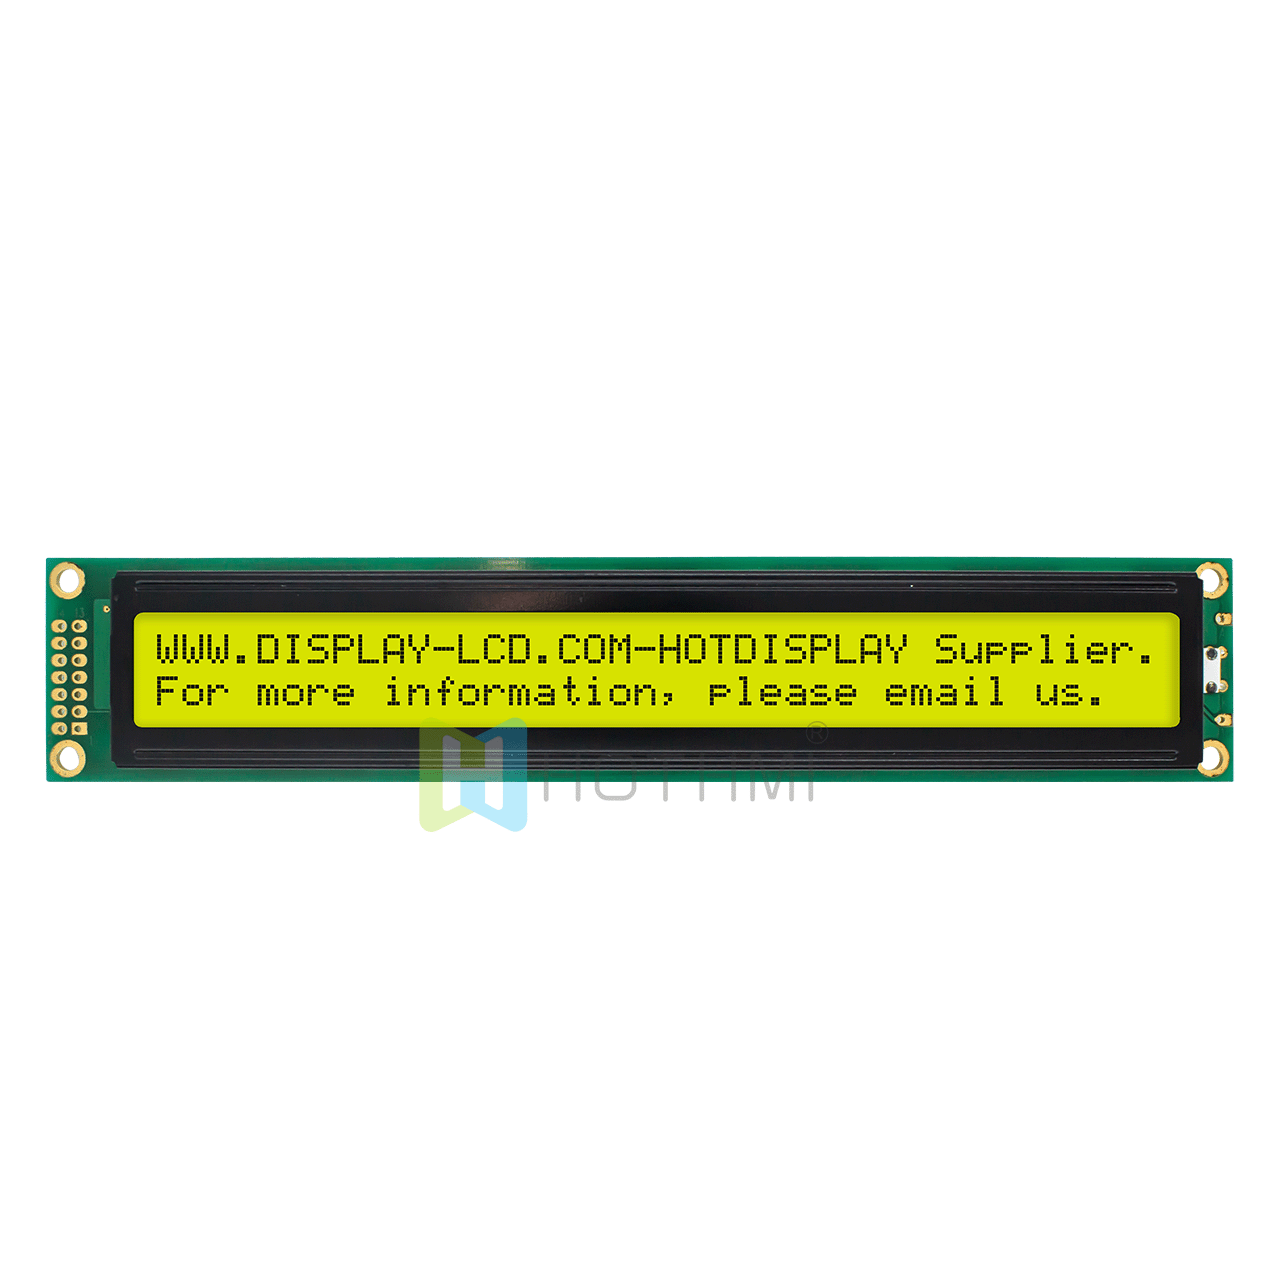 2X40 character monochrome LCD display | STN positive display | with yellow-green backlight | Arduino display | Adruino | 5.0v